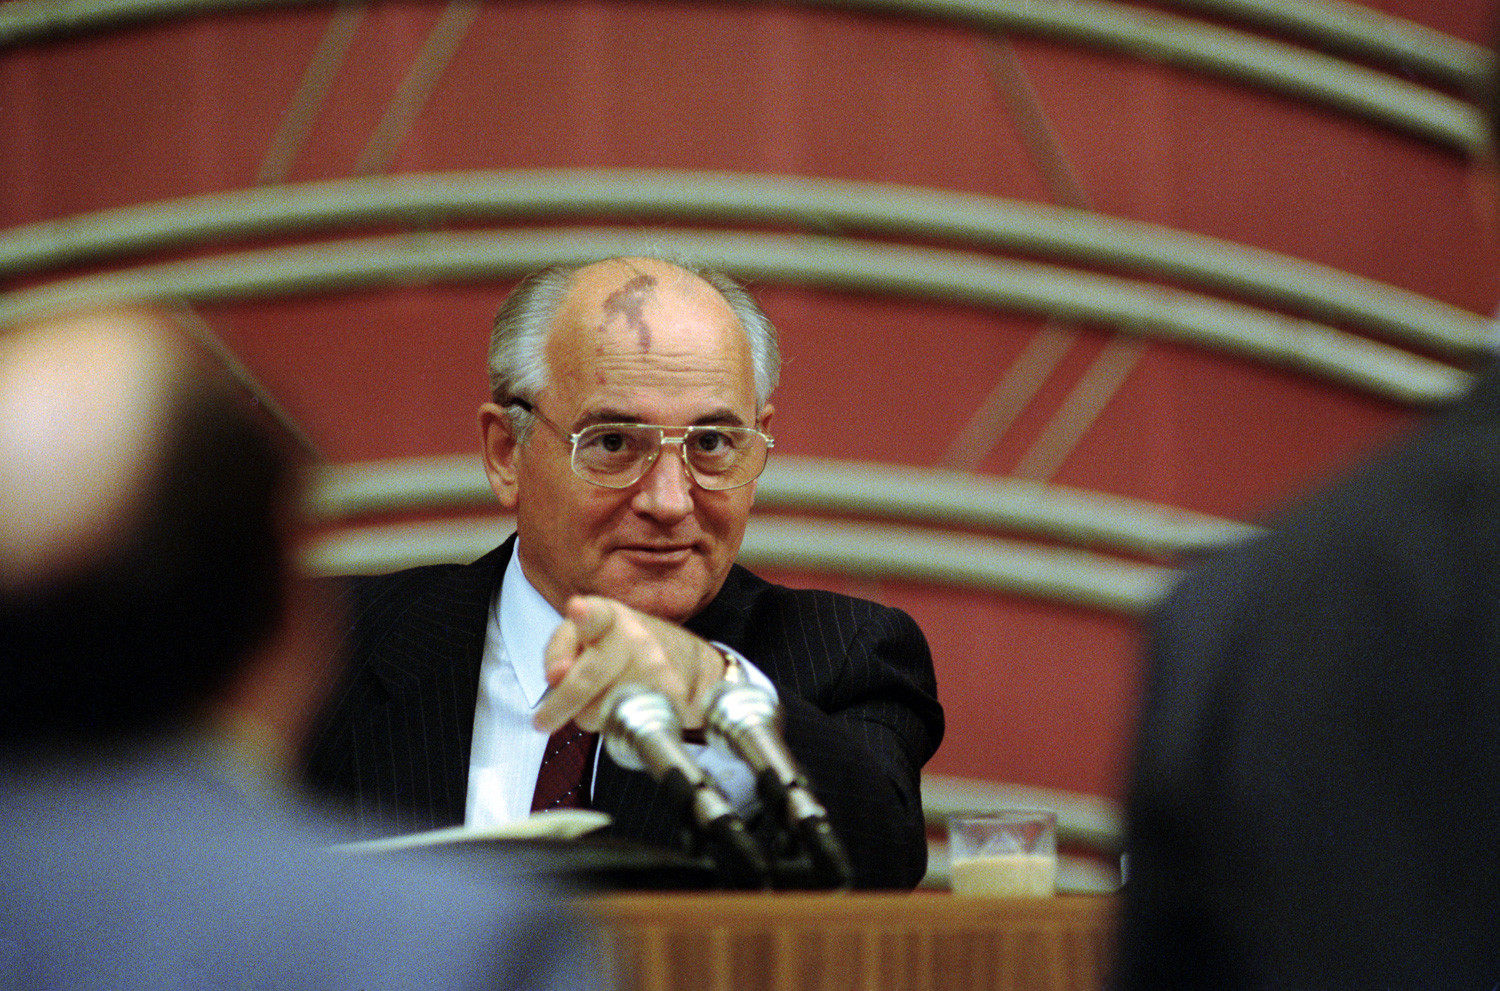 President Mikhail Gorbachev during the second session of the Russian Communist Party congress on Wednesday, Sept. 5, 1990 in Moscow